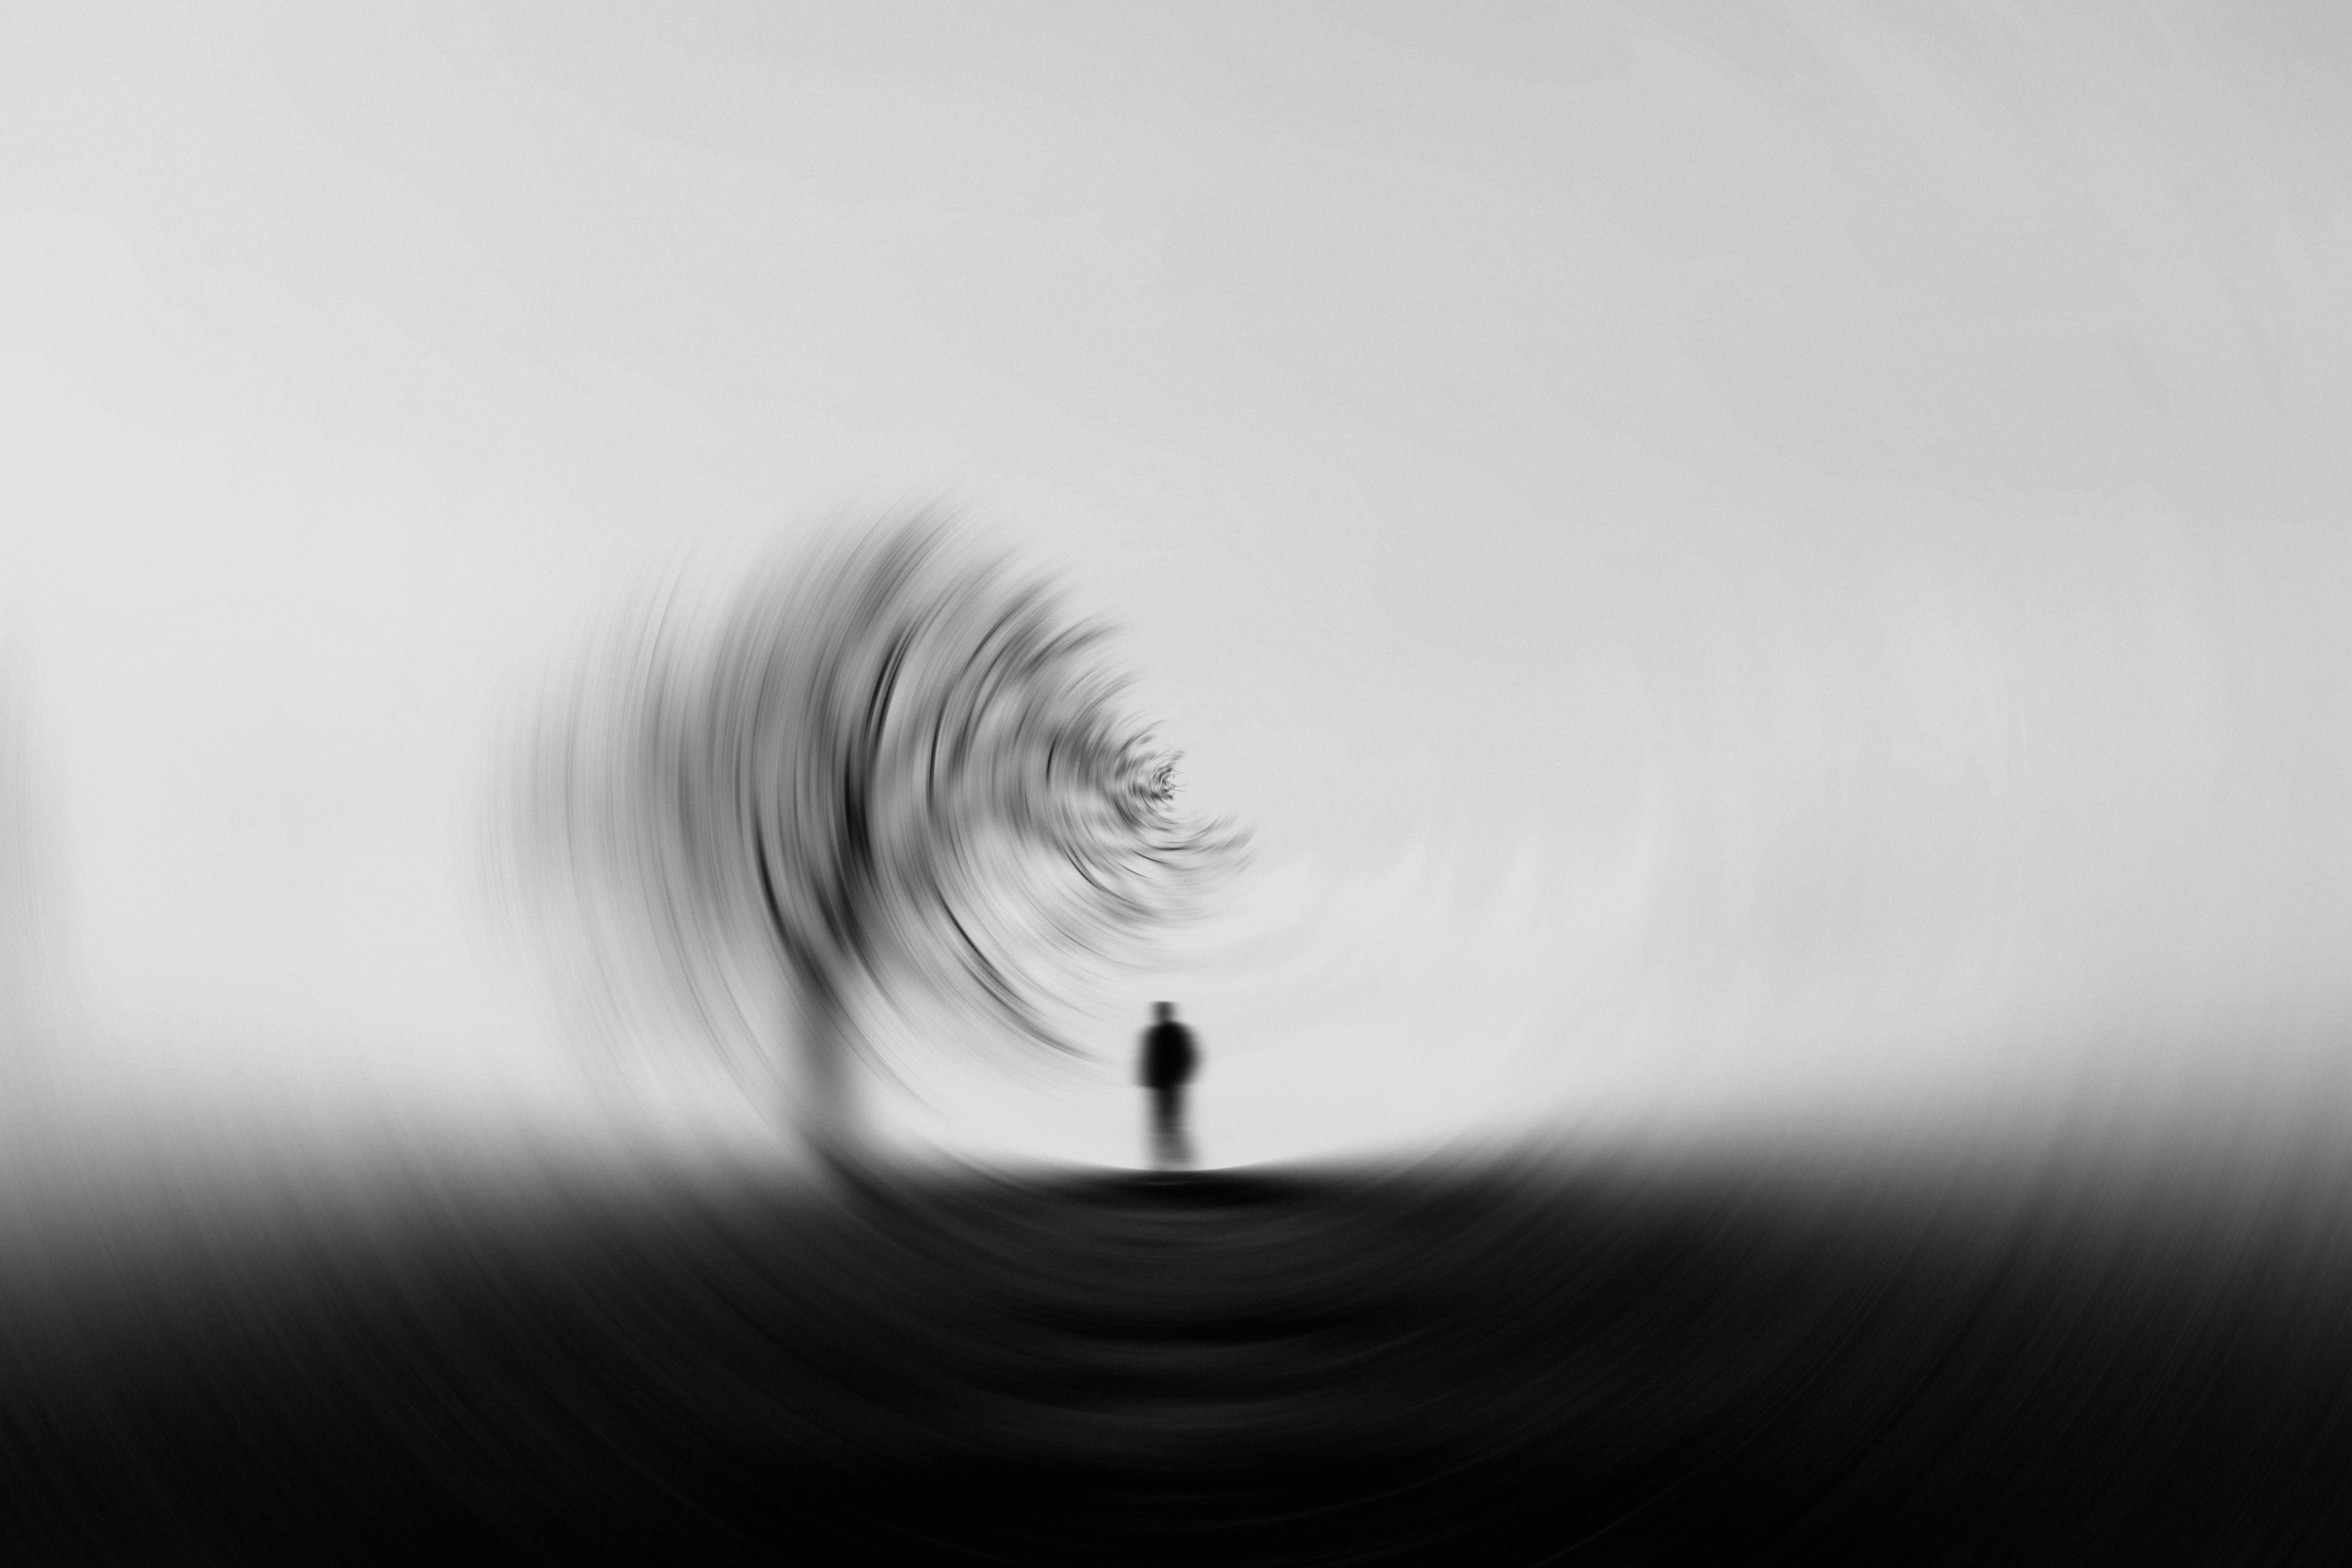 silhouette, bw, chb, smooth, blur, miscellanea, miscellaneous, wood, tree, effect images